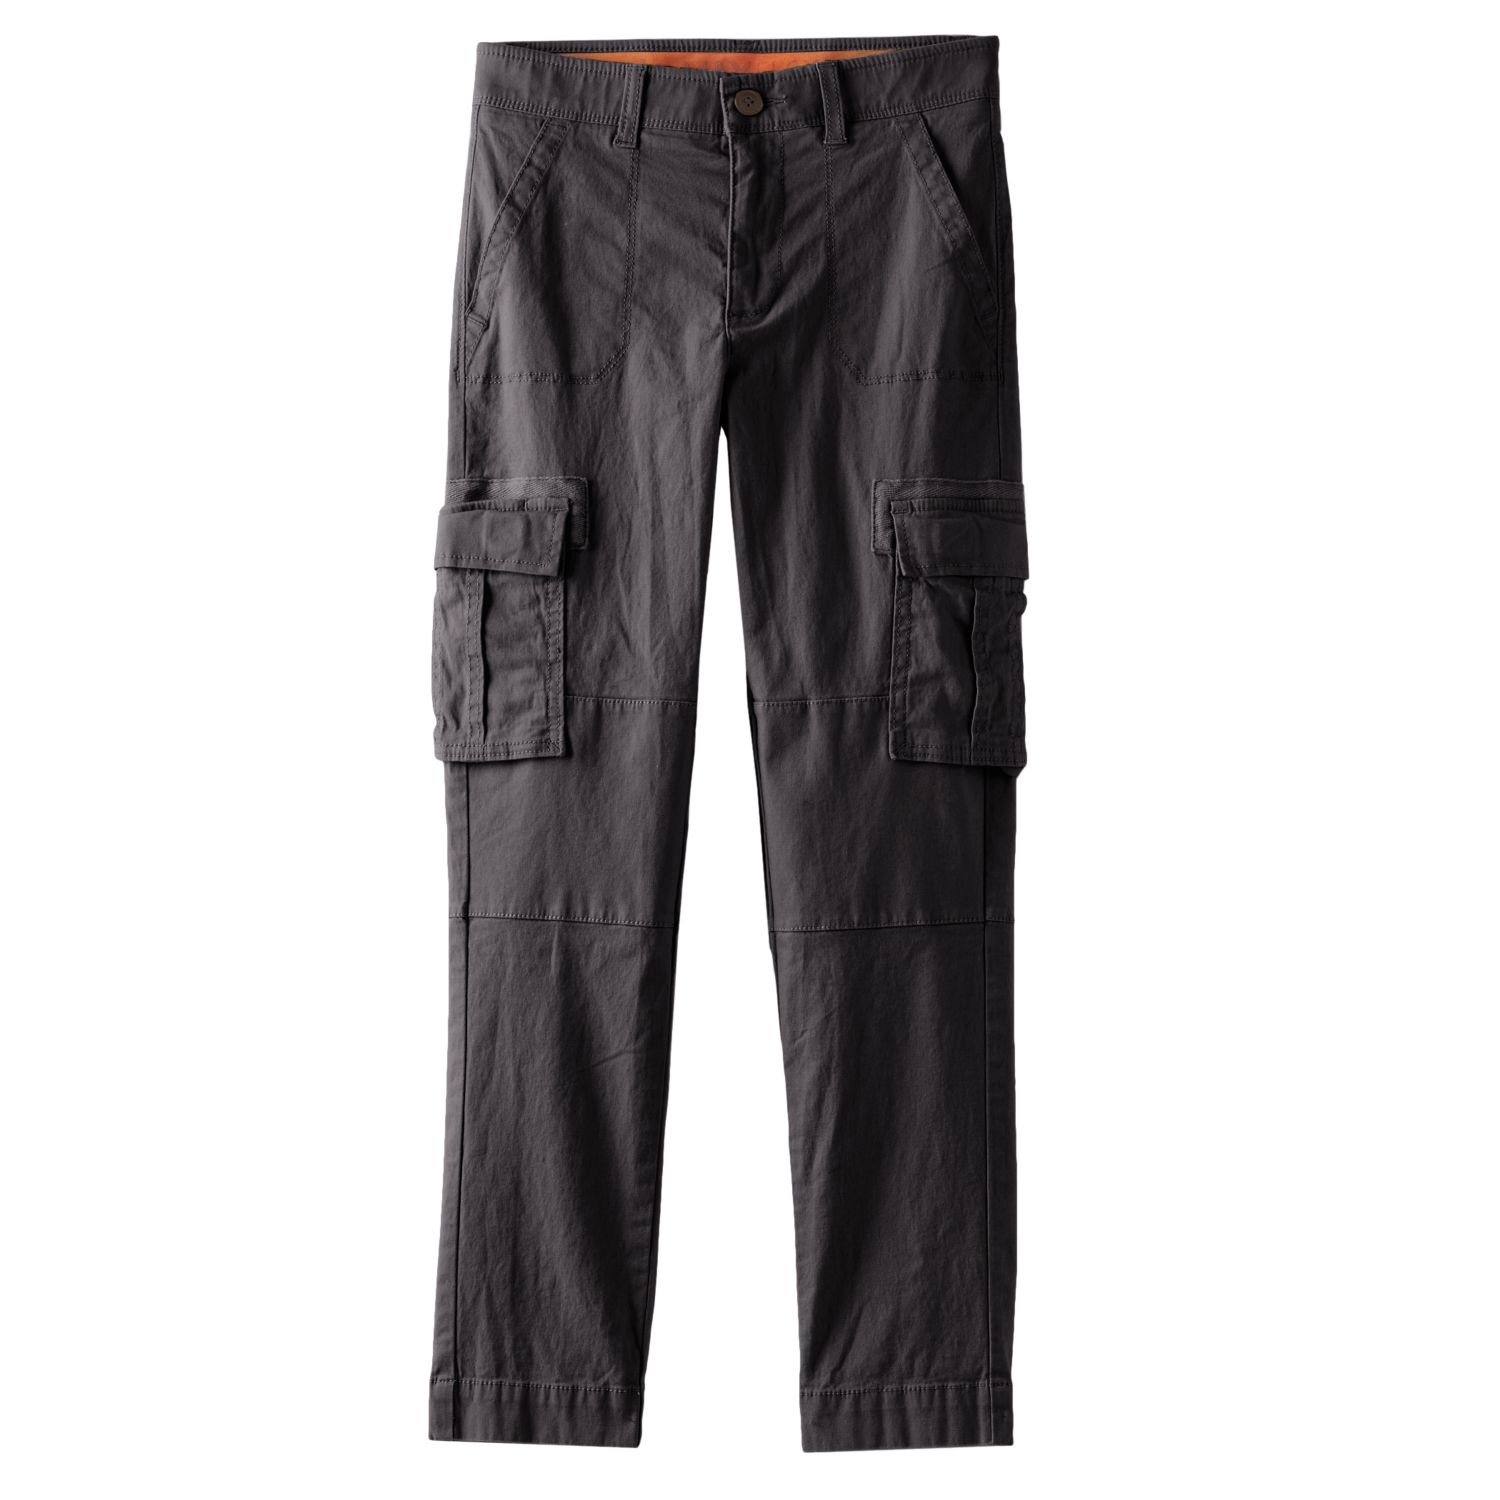 Urban Pipeline Mens Black Relaxed Straight Cargo Pants Size 30x32 30x30  P345 